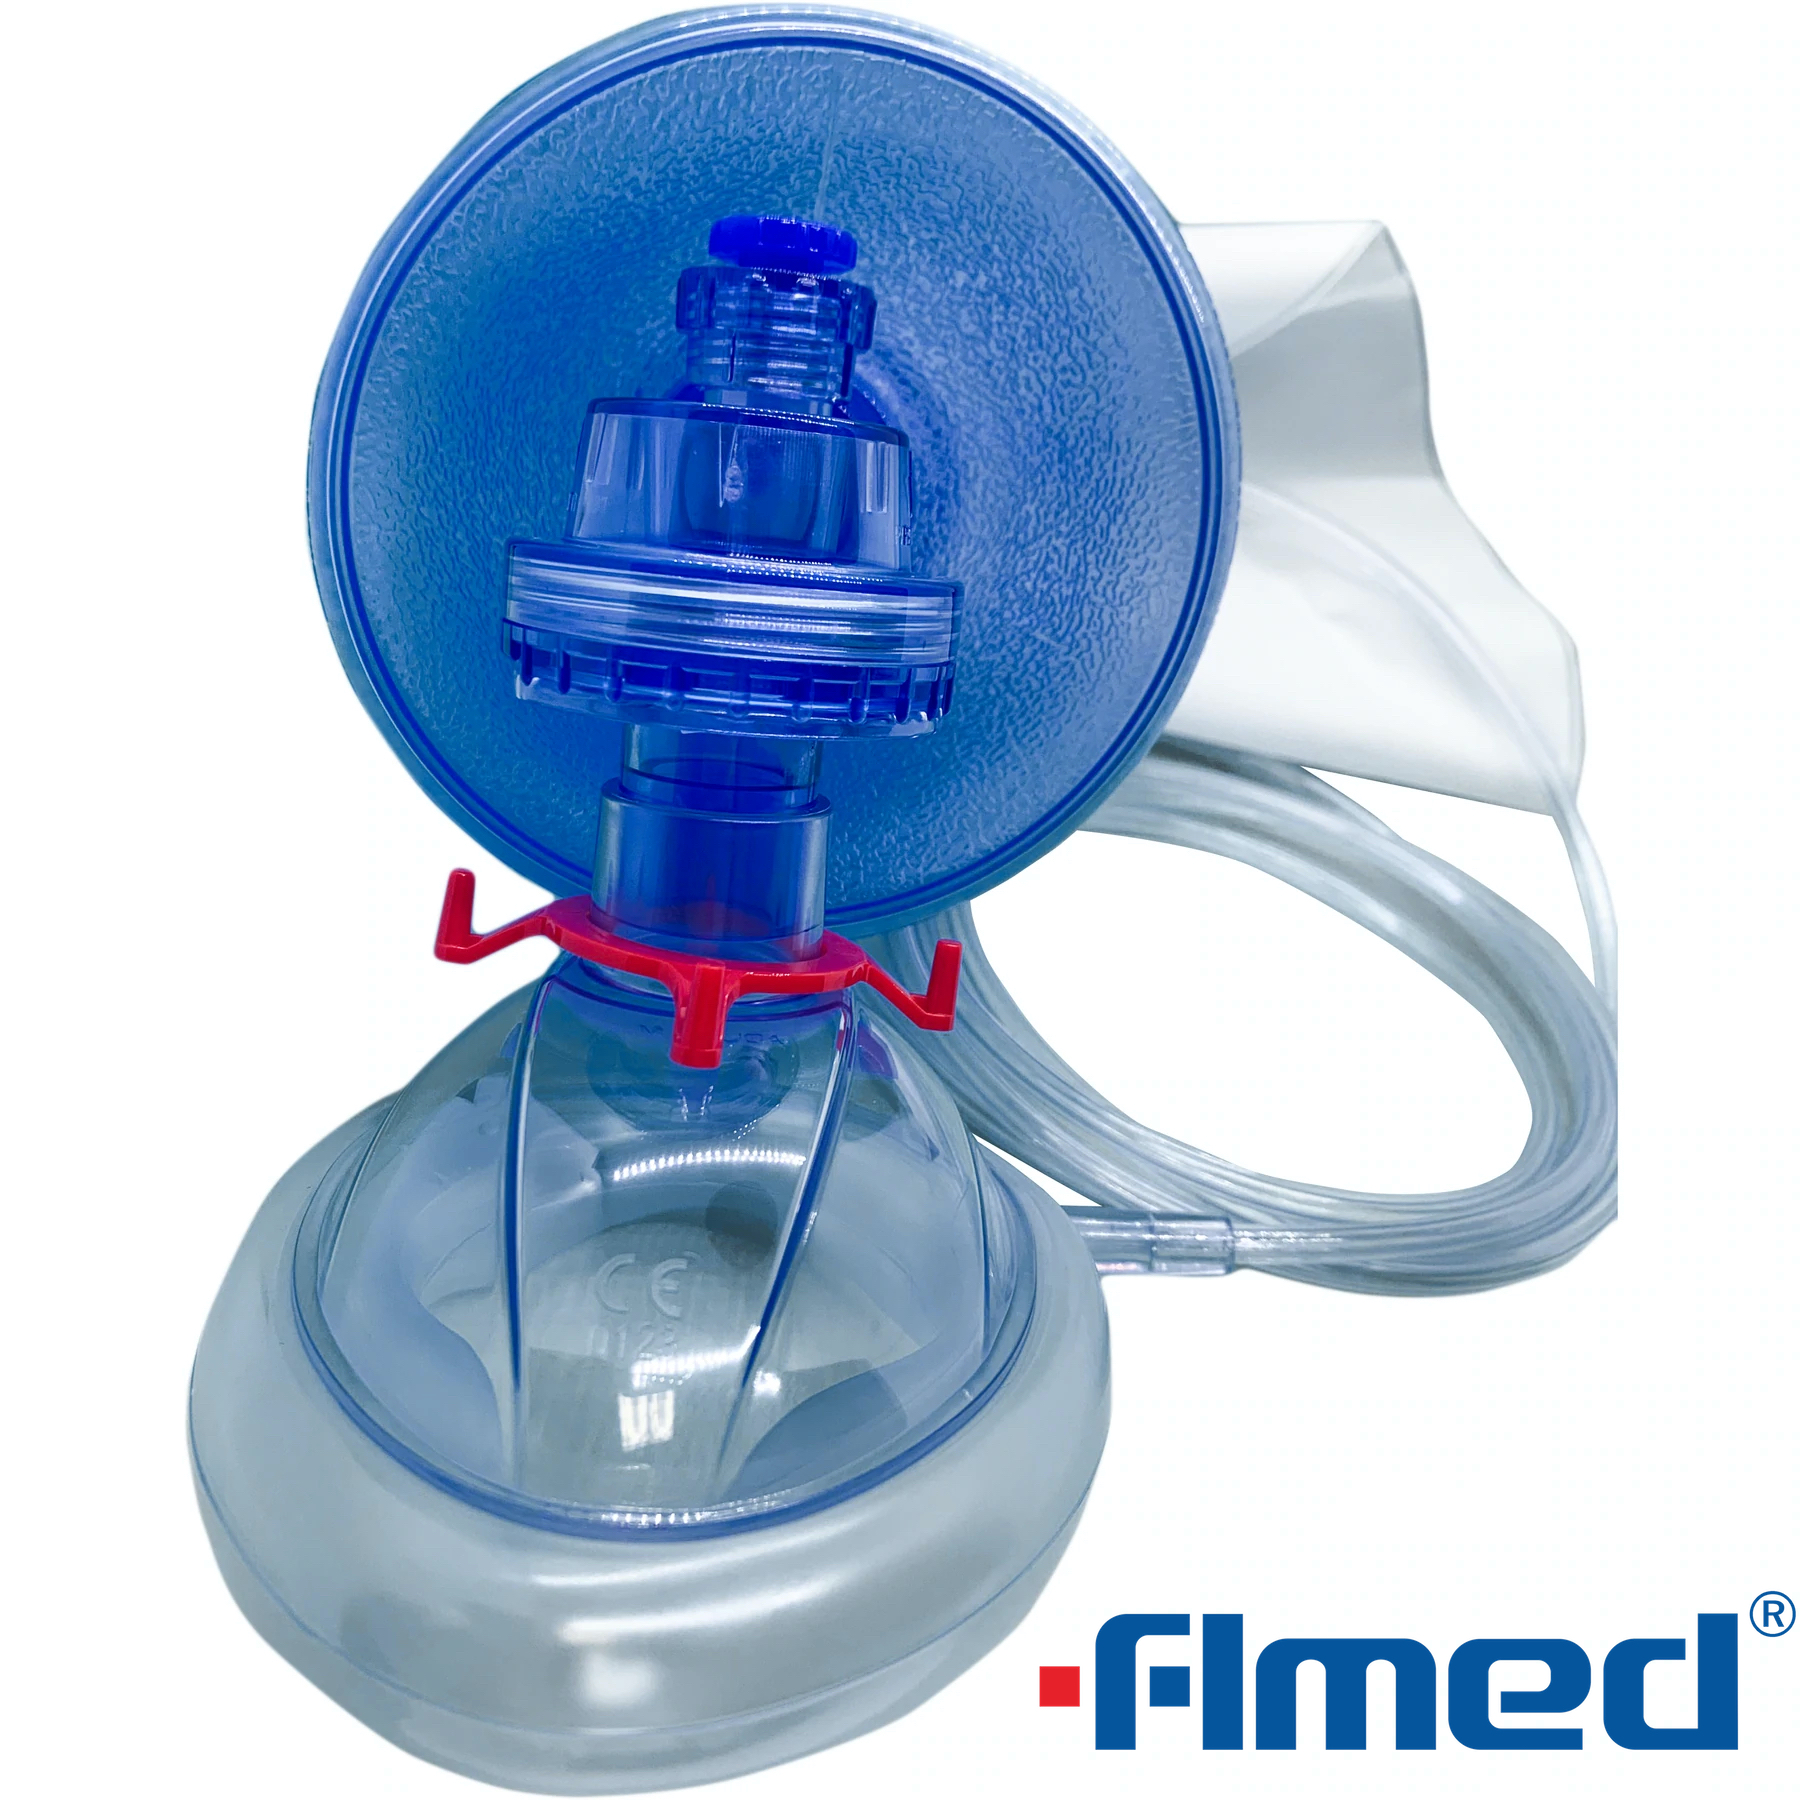 Emergency Silicone Resuscitator for Adult